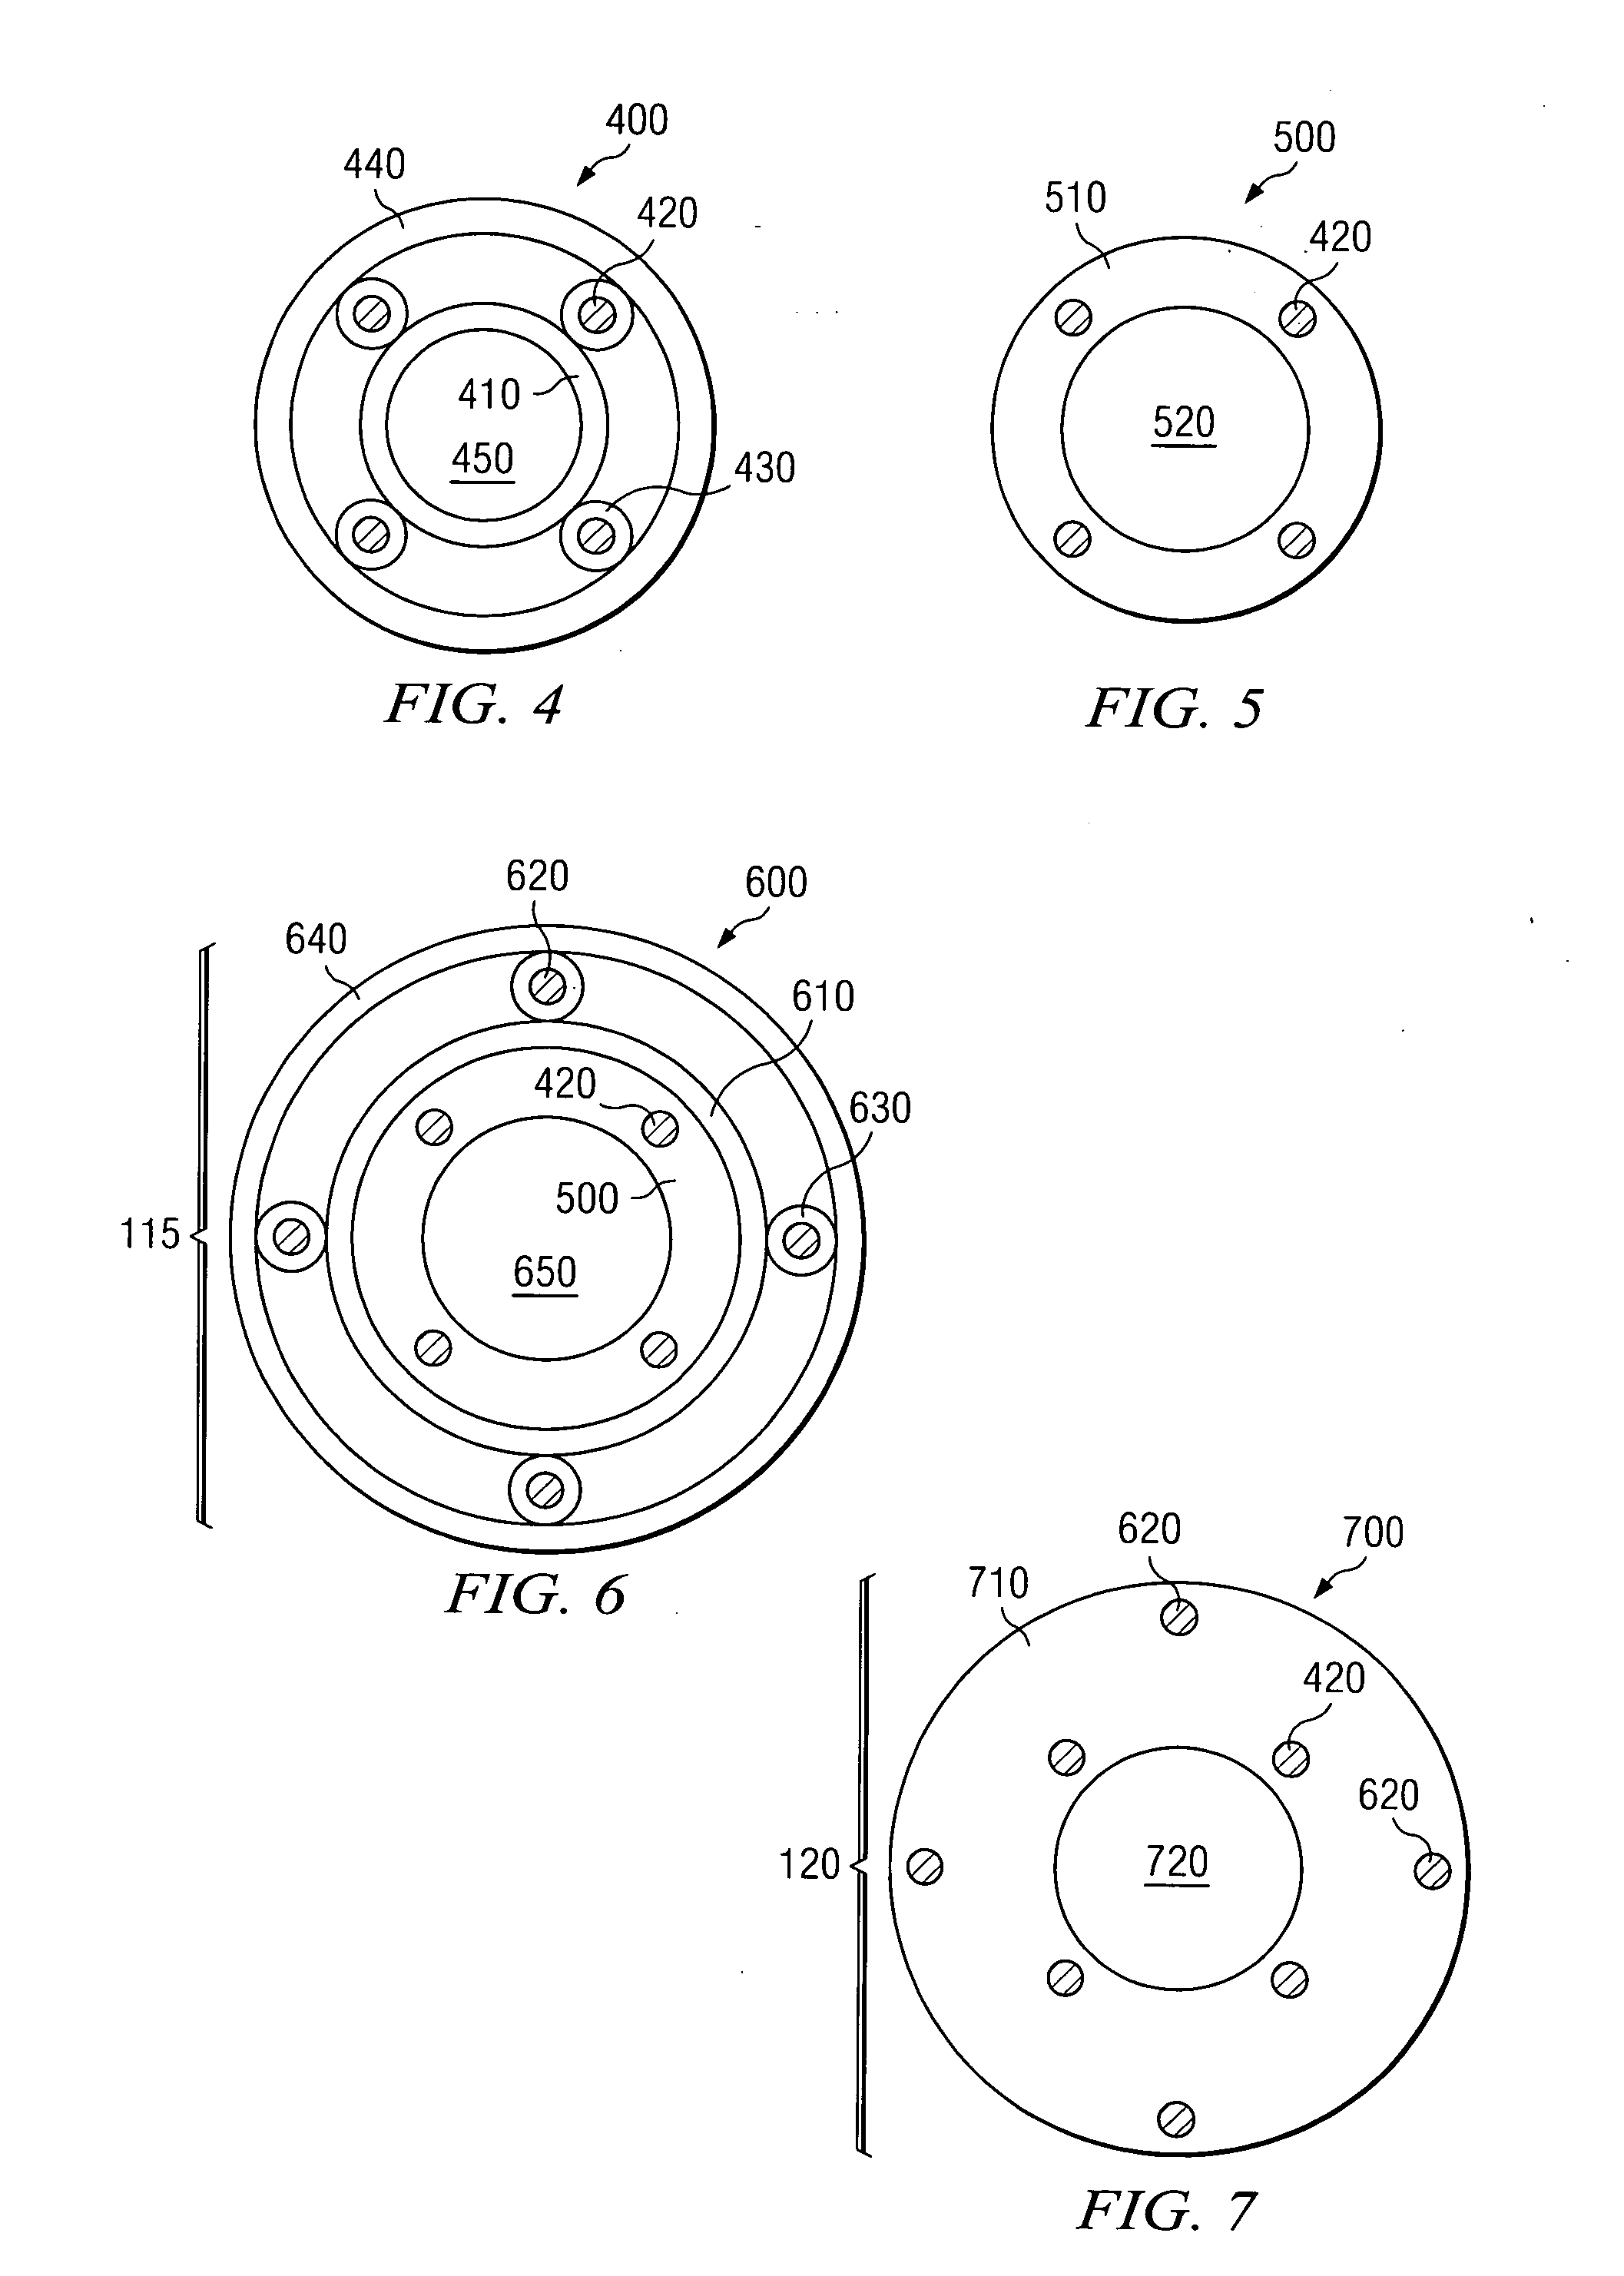 System and method for providing a medical lead body having dual conductor layers